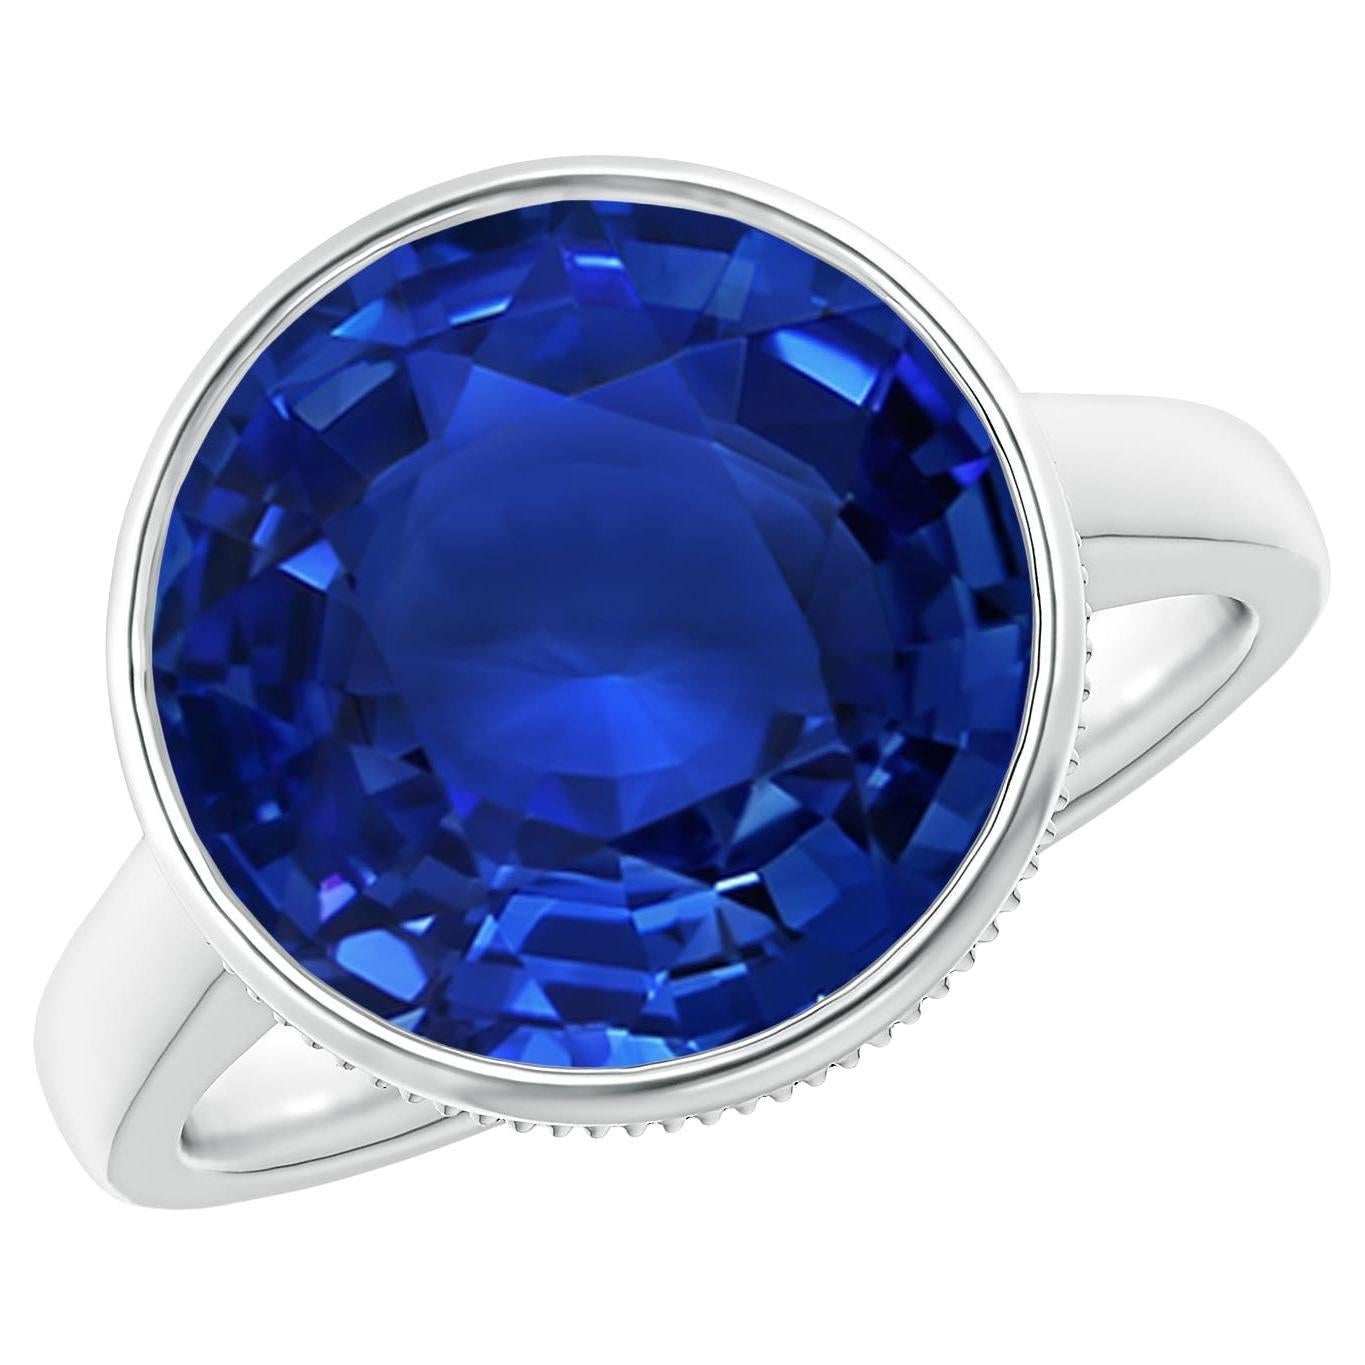 ANGARA GIA Certified Natural Ceylon Sapphire Solitaire Ring in White Gold